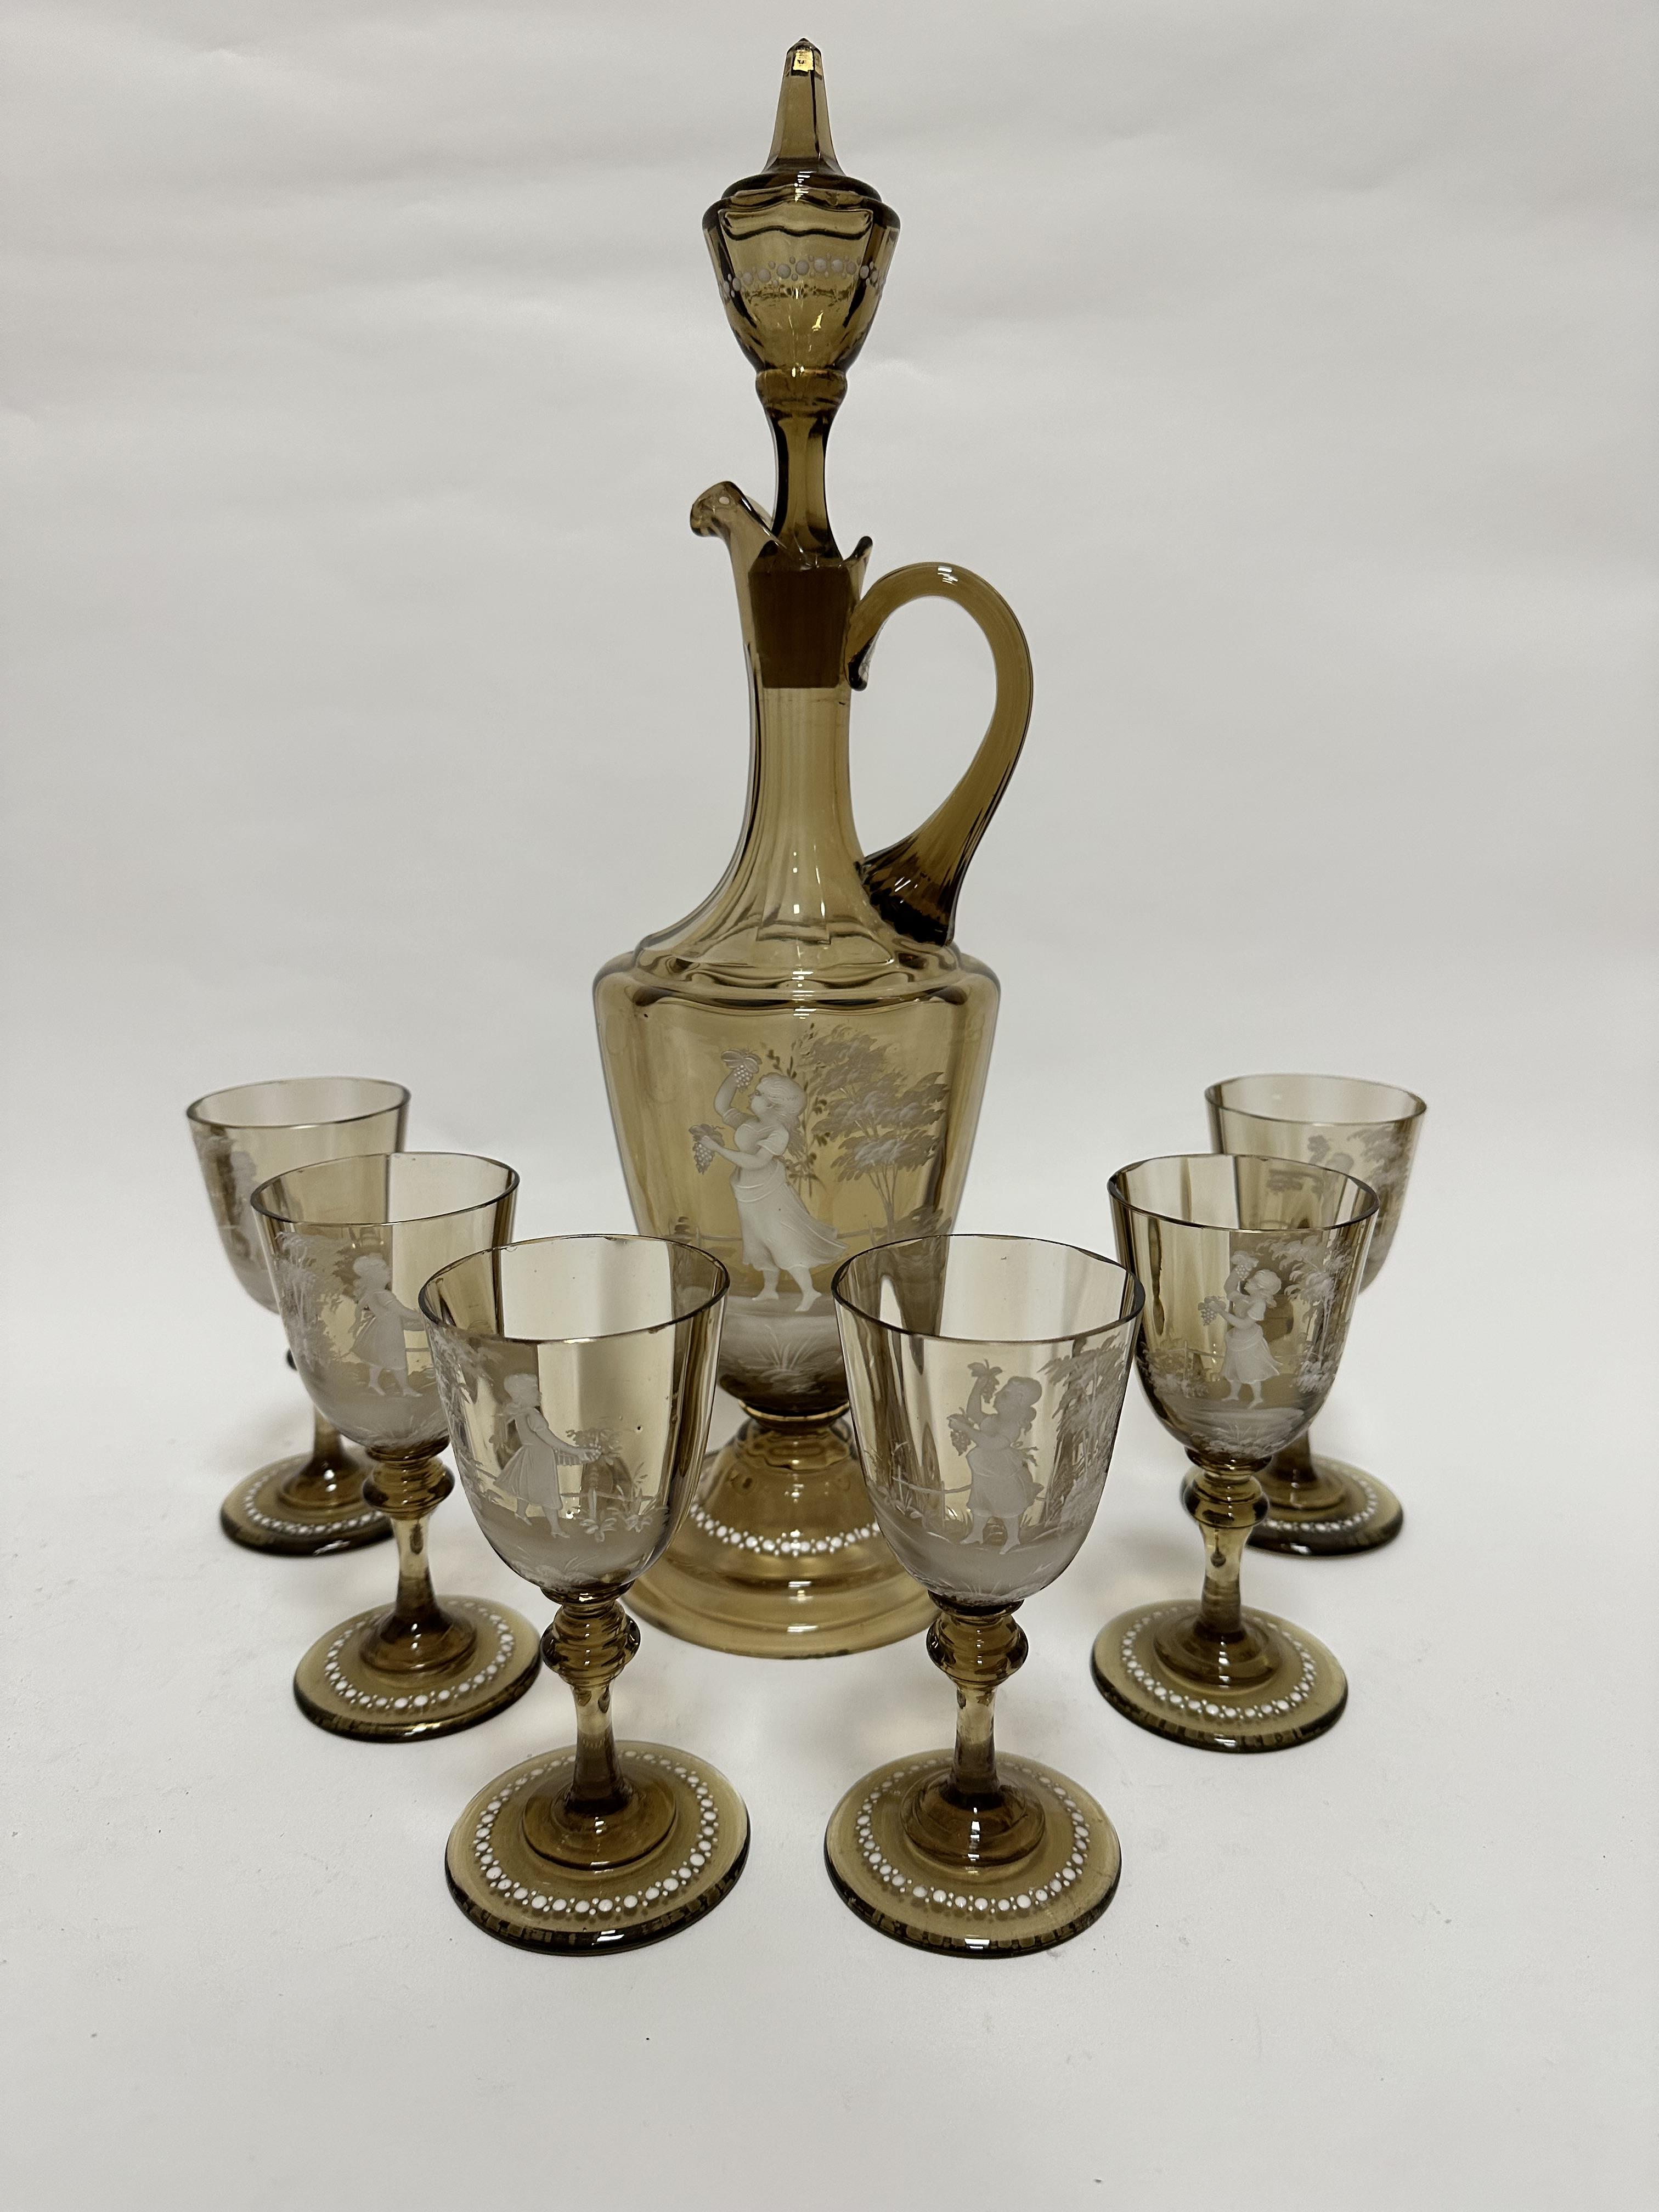 A 19thc pale amber decanter and set of six panelled glasses with Mary Gregory enamelled